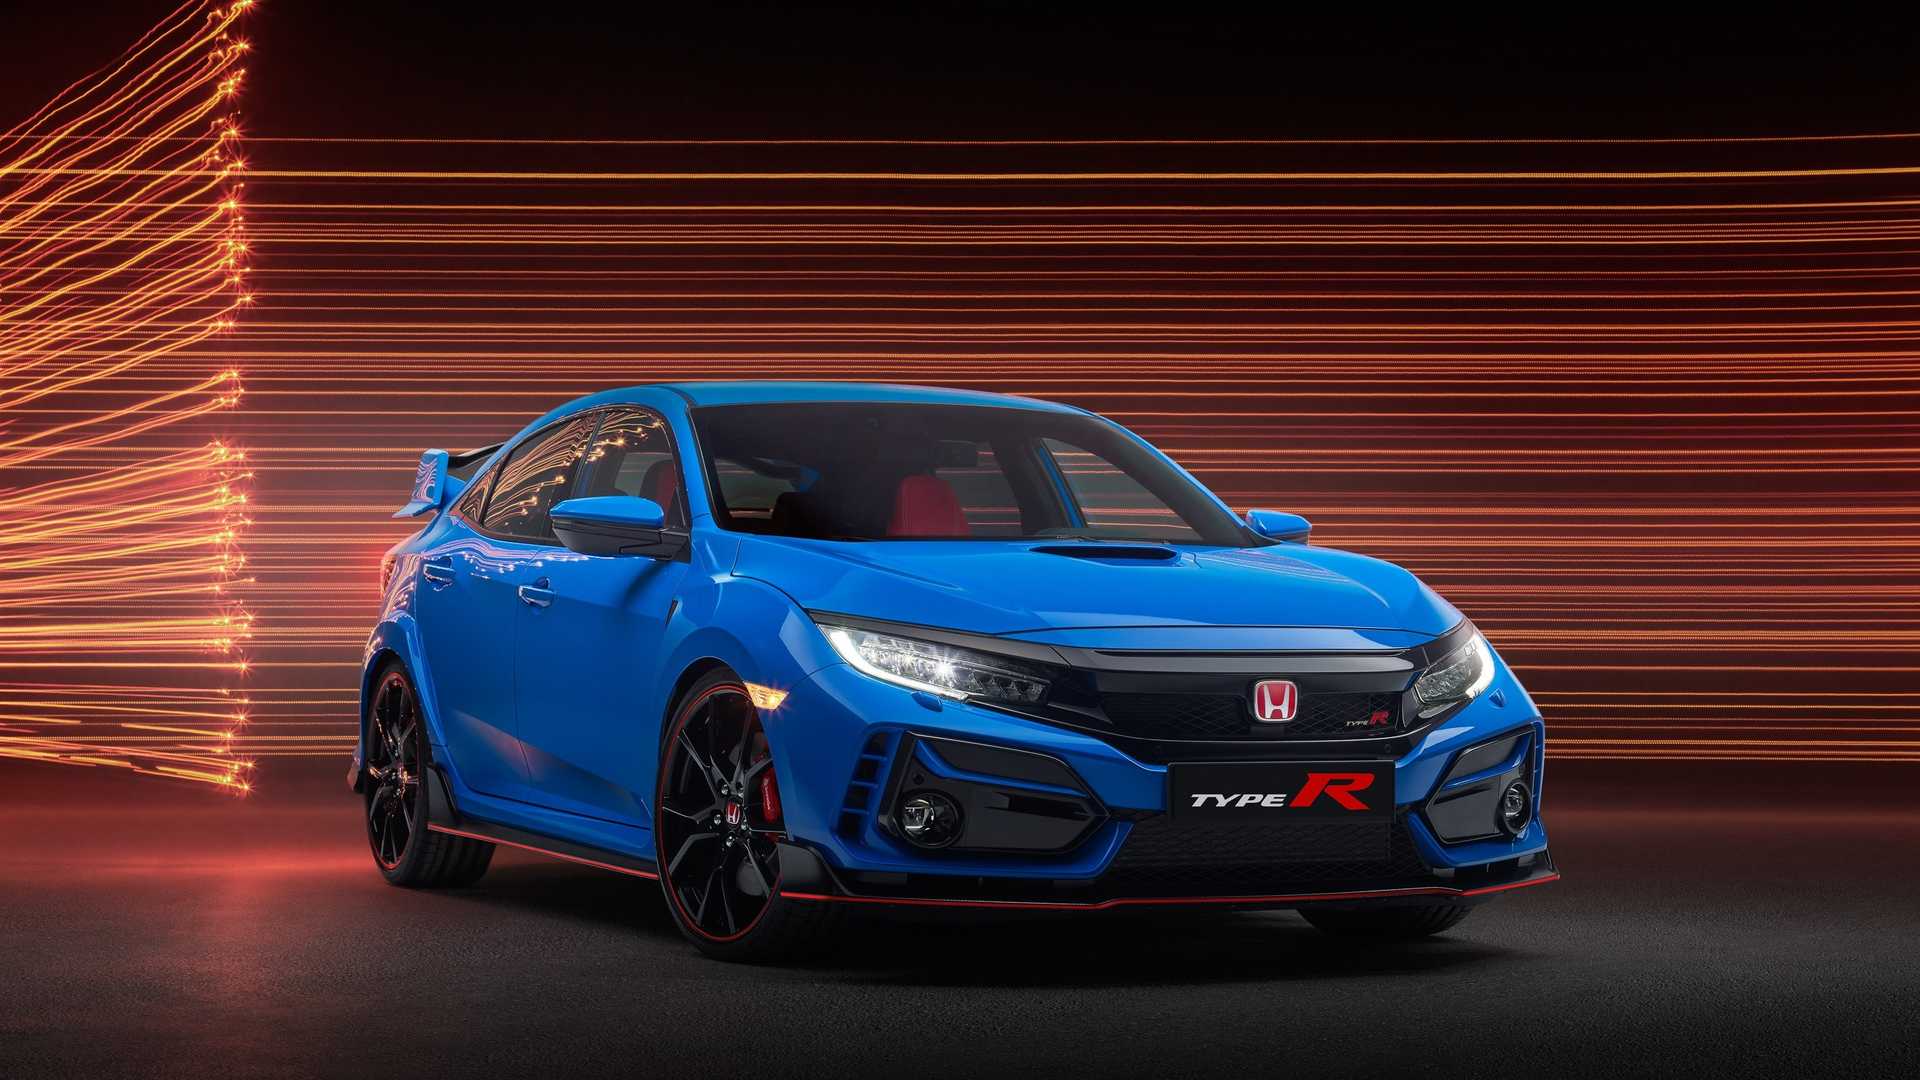 2021 Honda Civic Type R Limited Edition is lighter and more brilliant